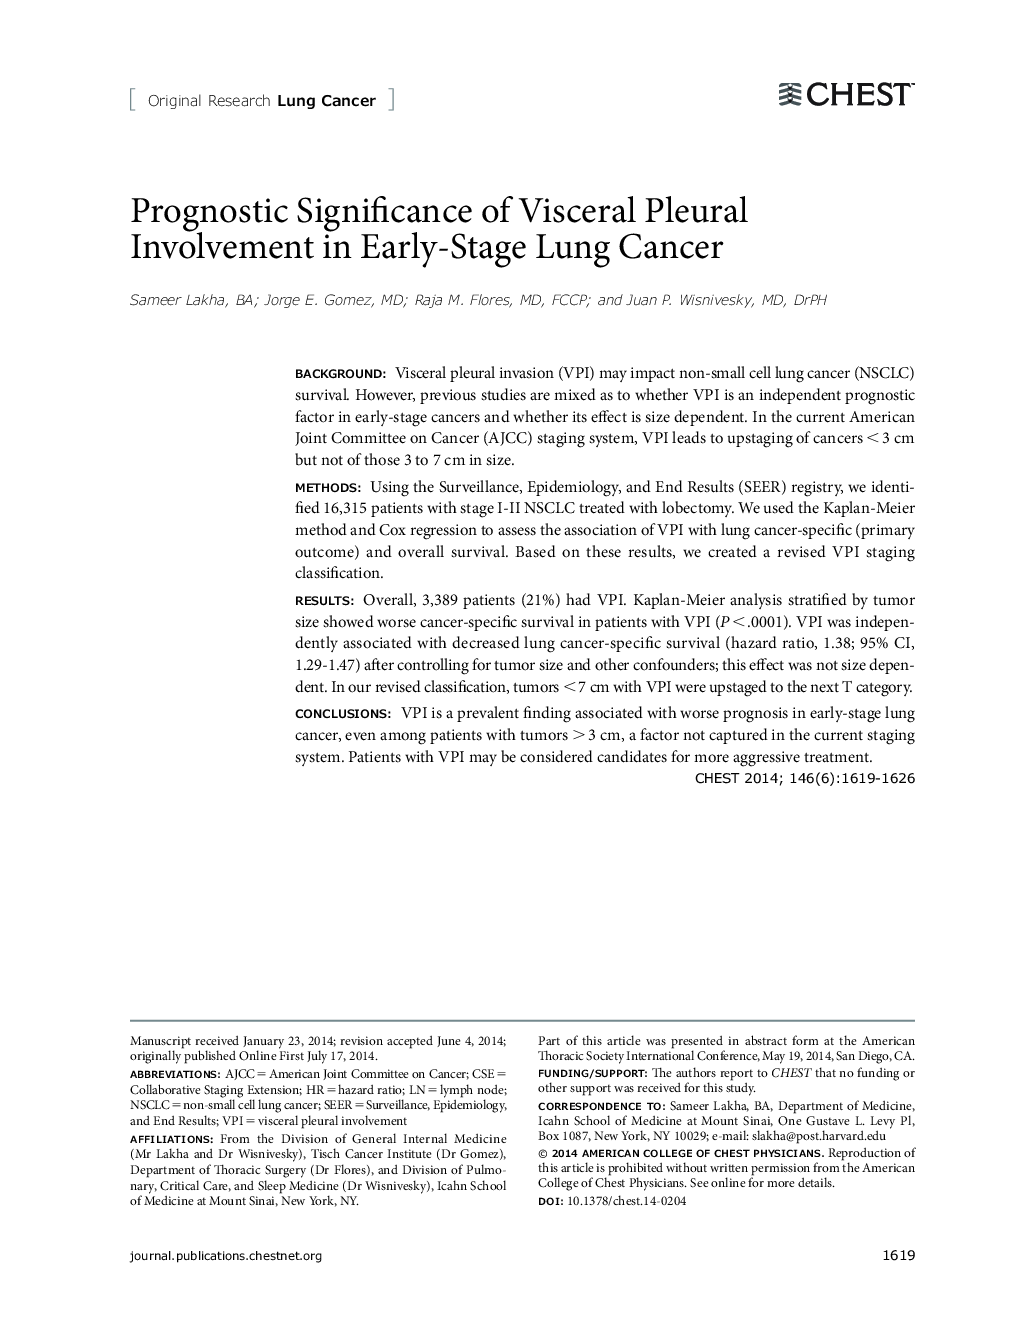 Prognostic Significance of Visceral Pleural Involvement in Early-Stage Lung Cancer